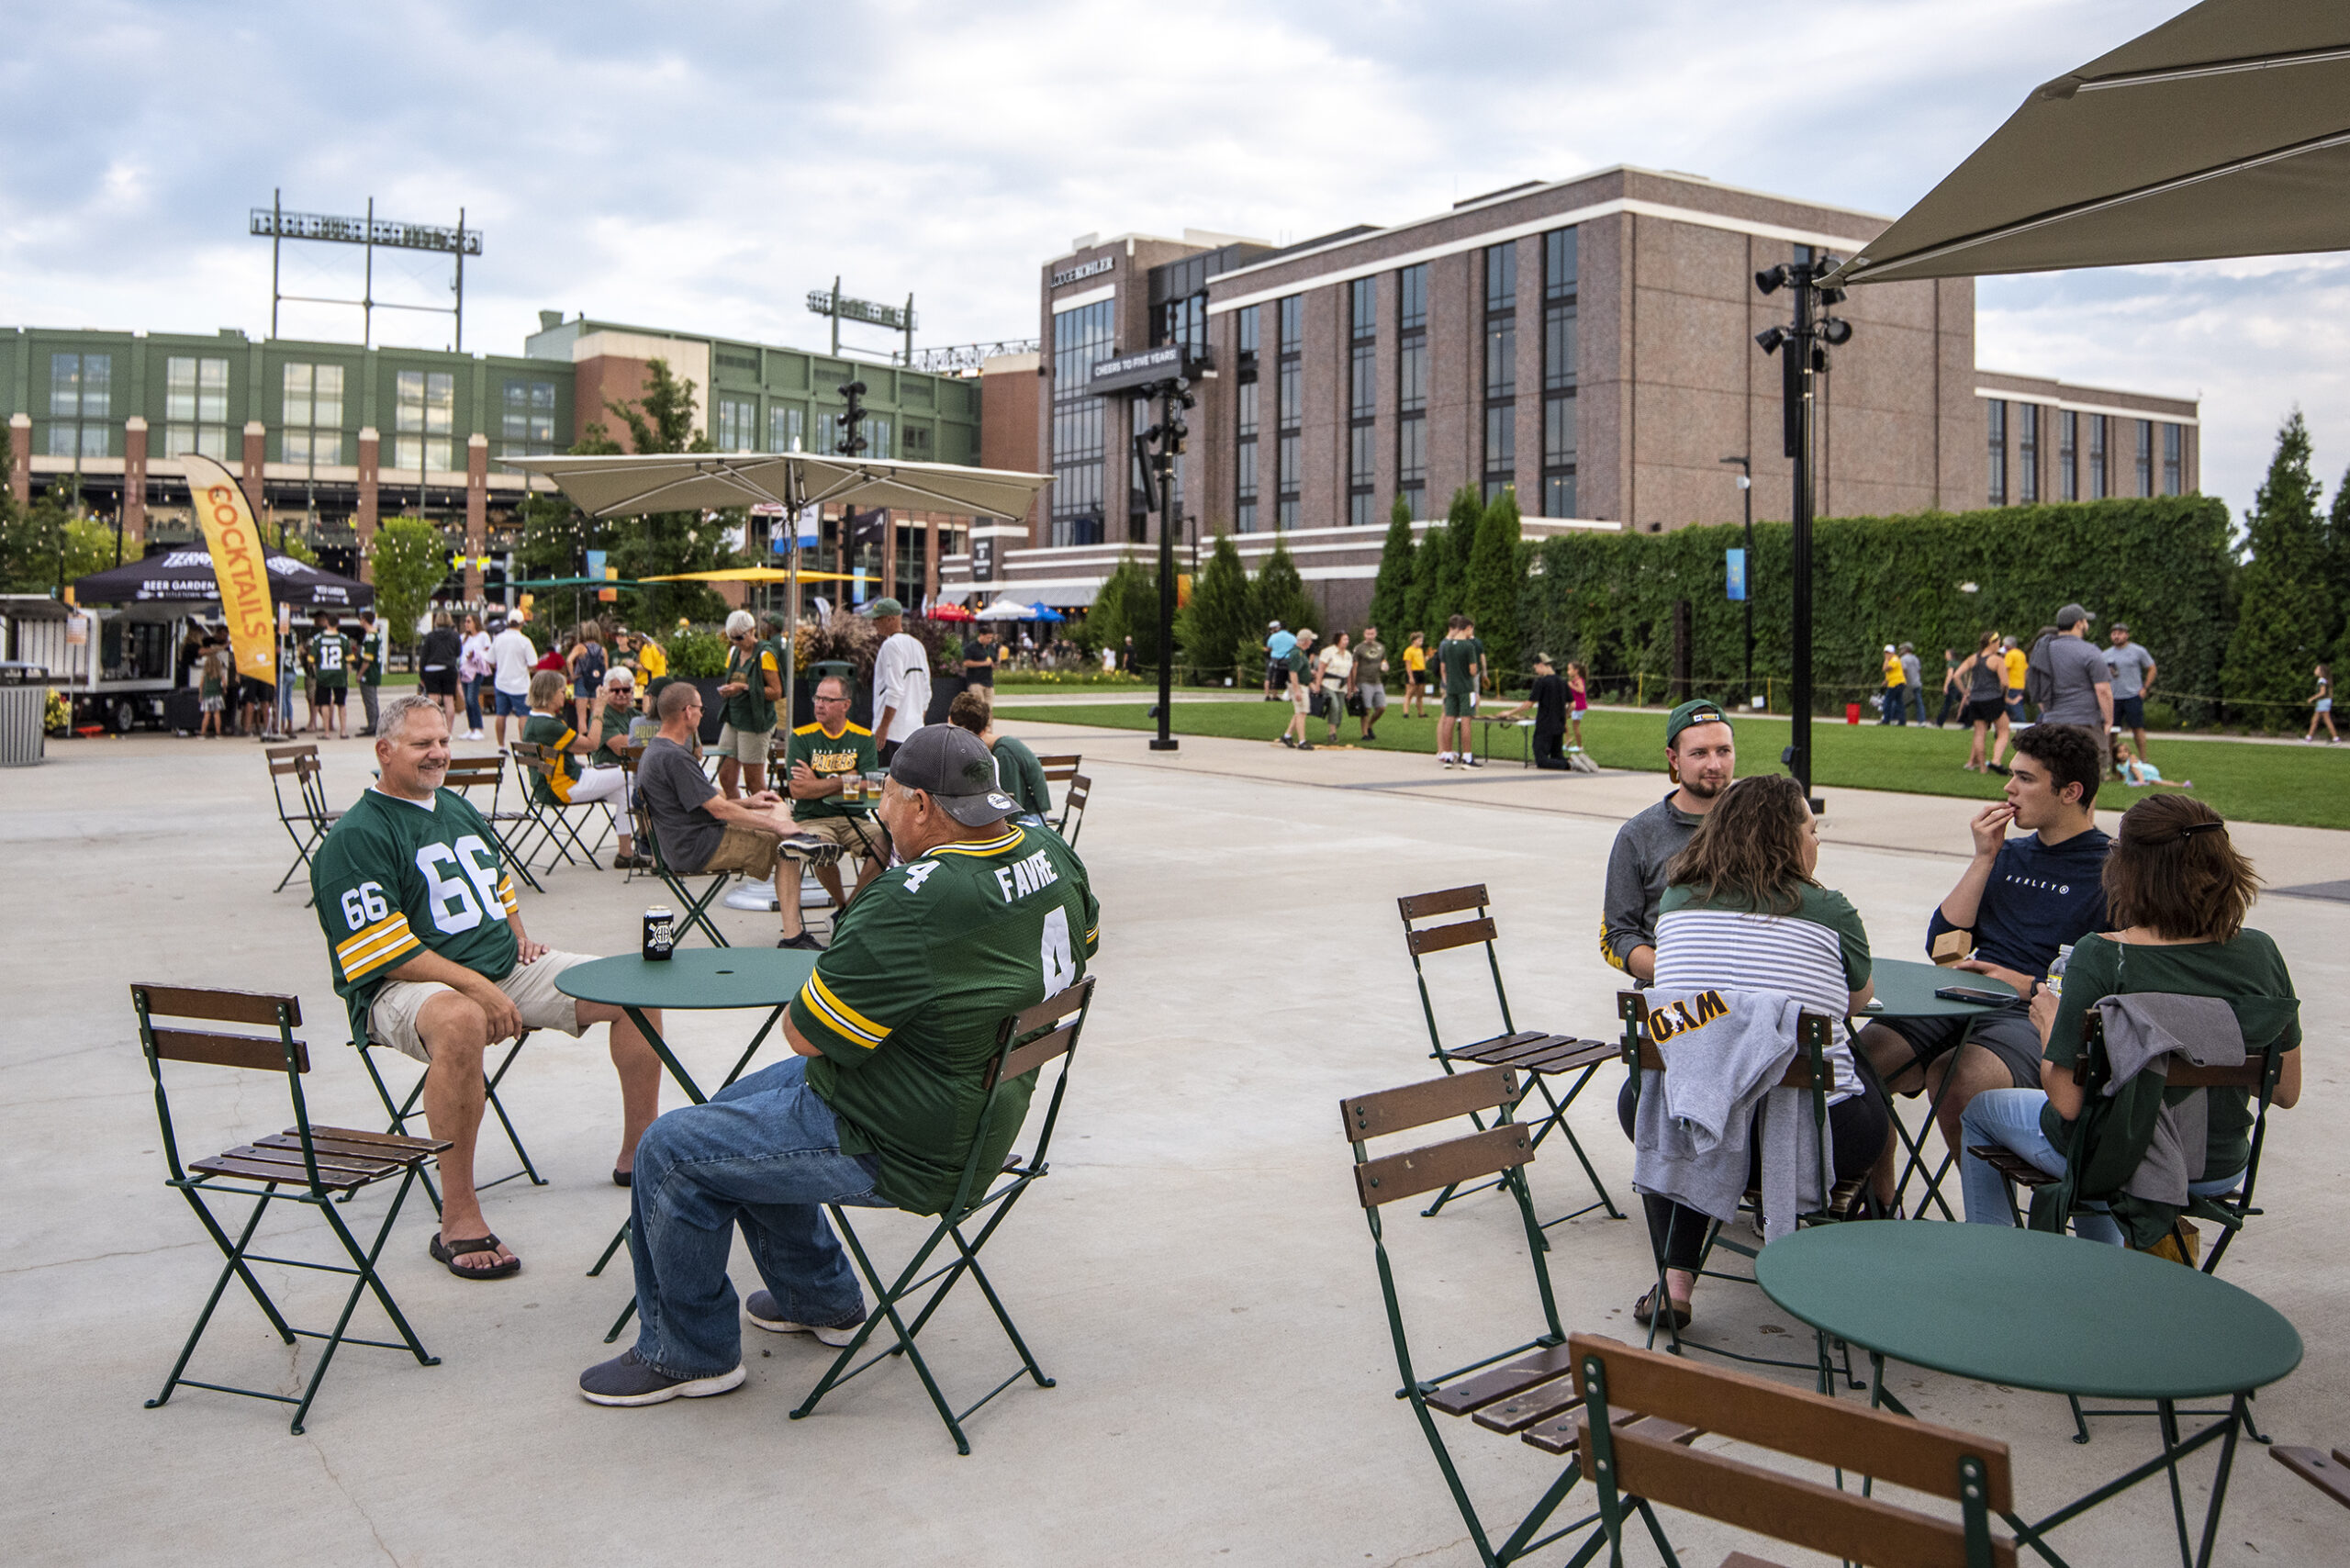 Fans in Packers gear drink beer at tables set up near the stadium.